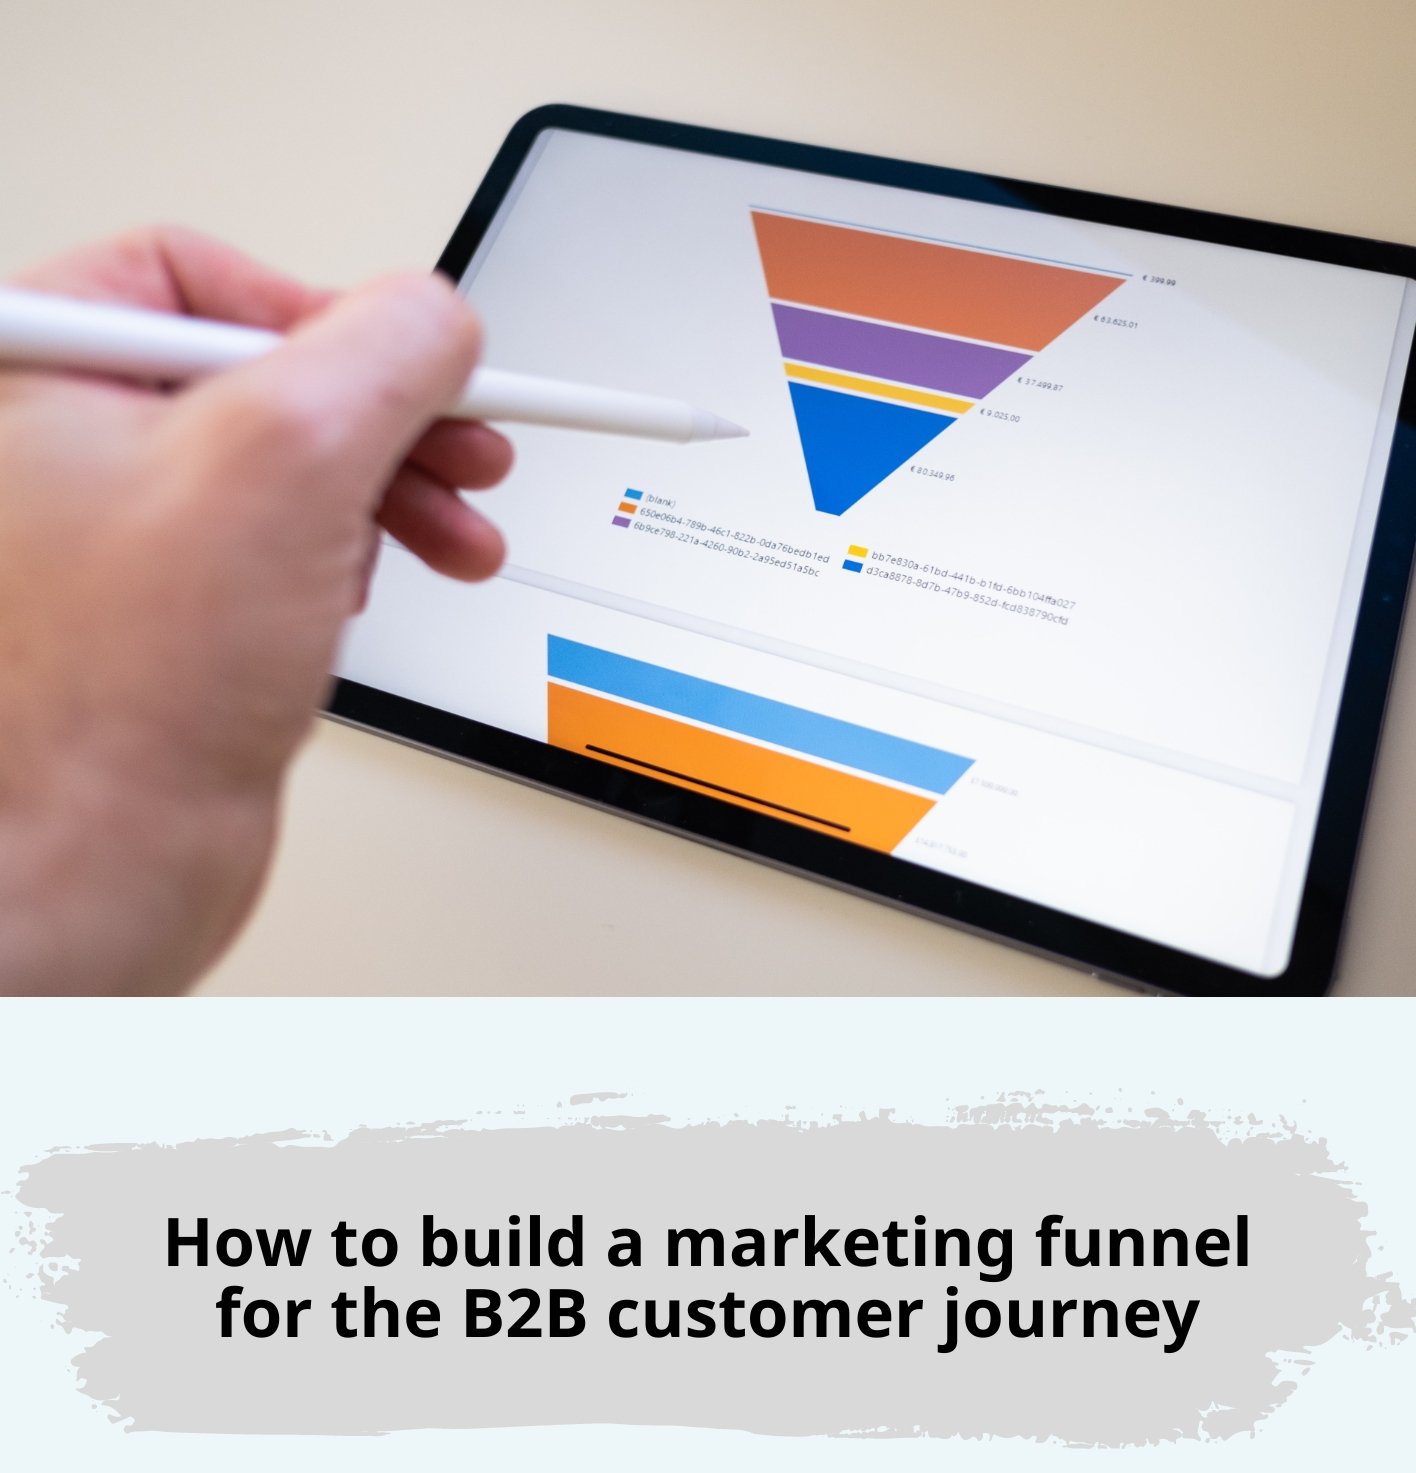 How to build a marketing funnel for the B2B customer journey